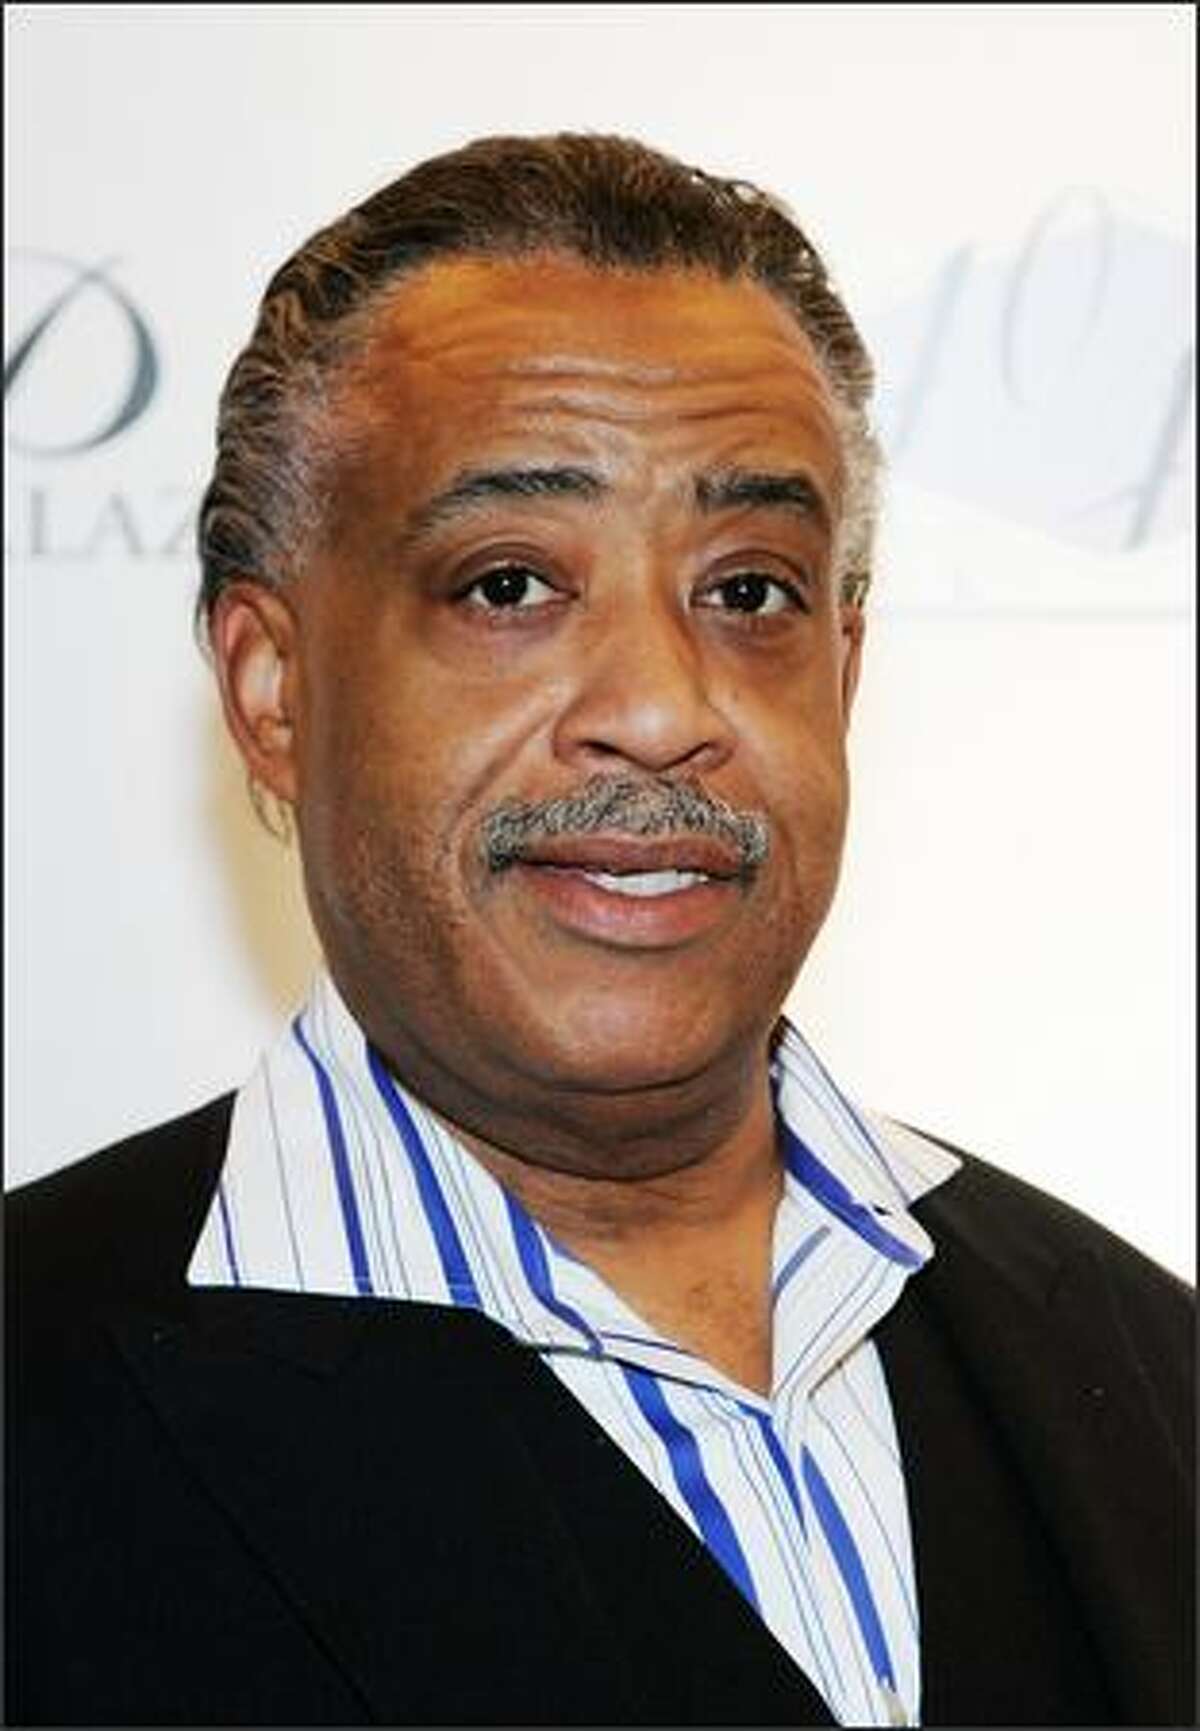 The Rev. Al Sharpton arrives at the opening of Jay-Z's 40/40 Club.